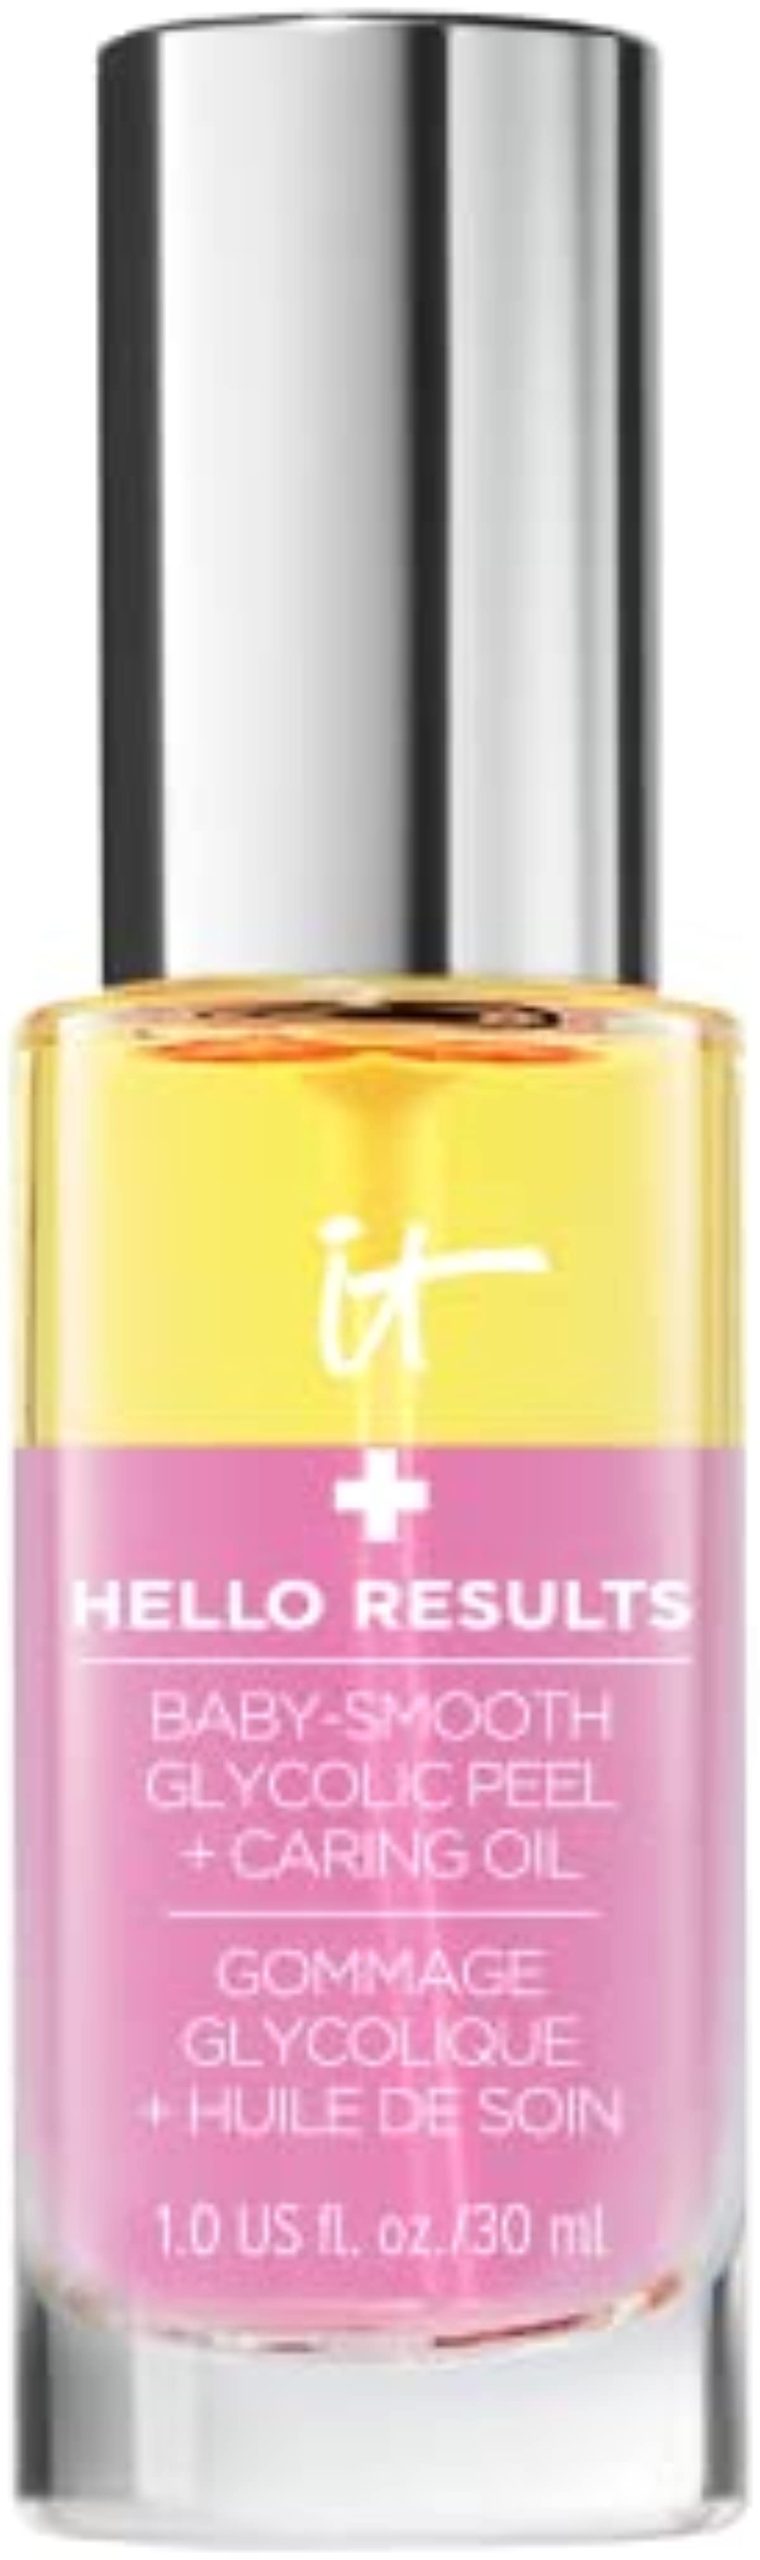 IT Cosmetics Hello Results Baby-Smooth Glycolic Acid Peel + Caring Face Oil with Argan Oil - 1.0 fl oz